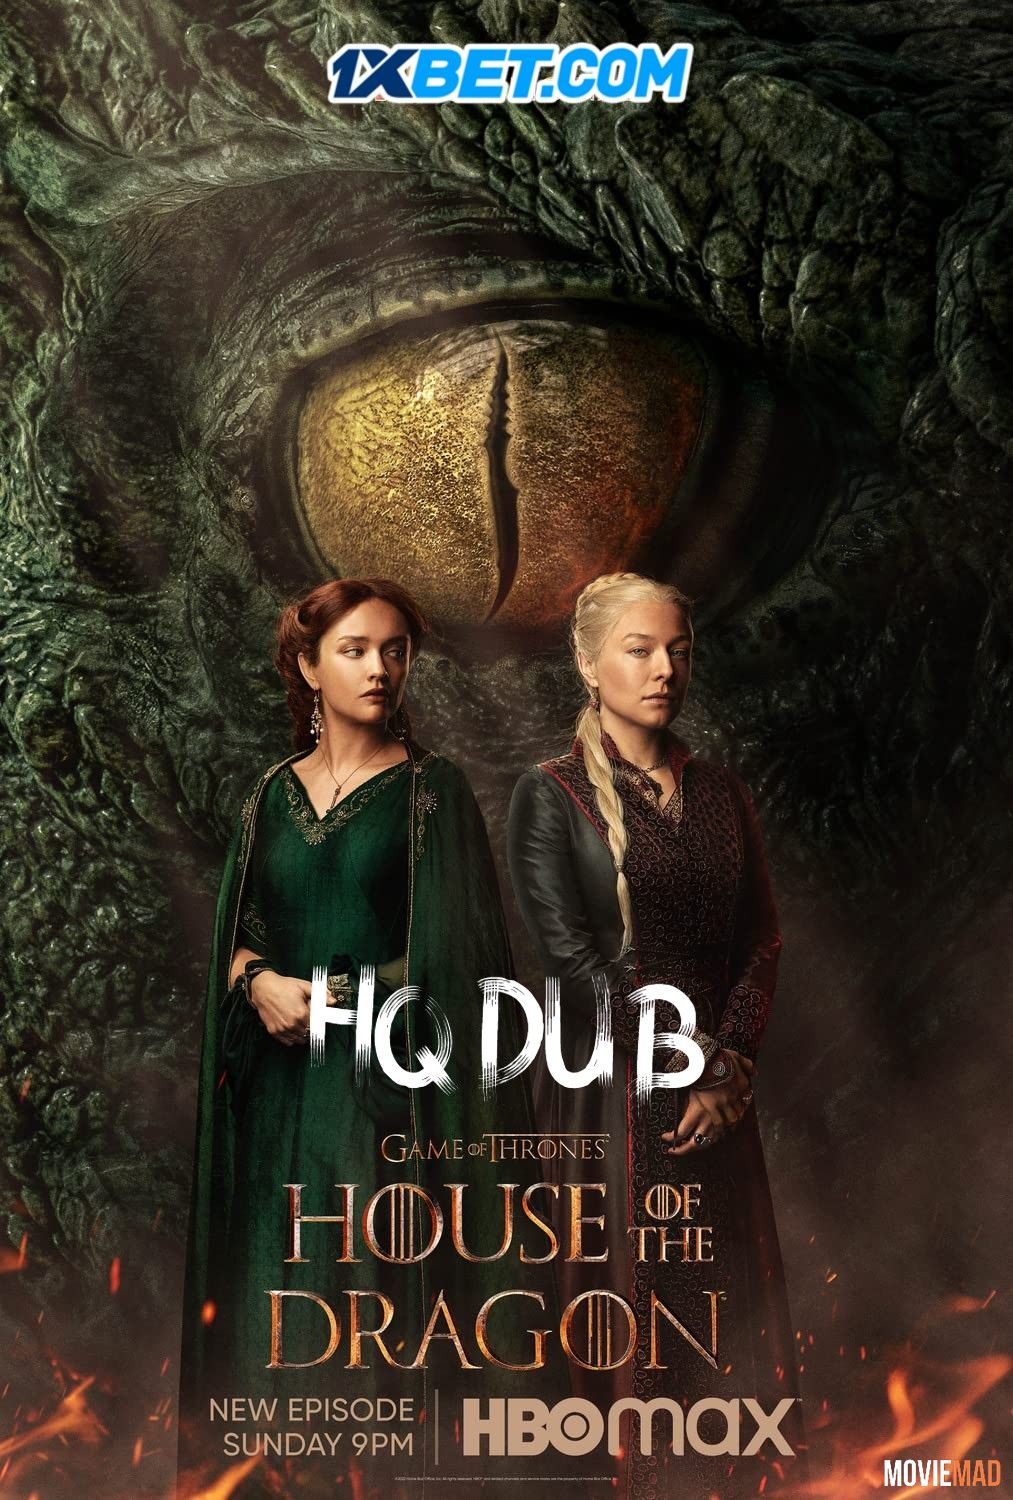 full moviesHouse Of The Dragon S01E10 (2022) Hindi (Voice Over) Dubbed HBOMAX HDRip 1080p 720p 480p